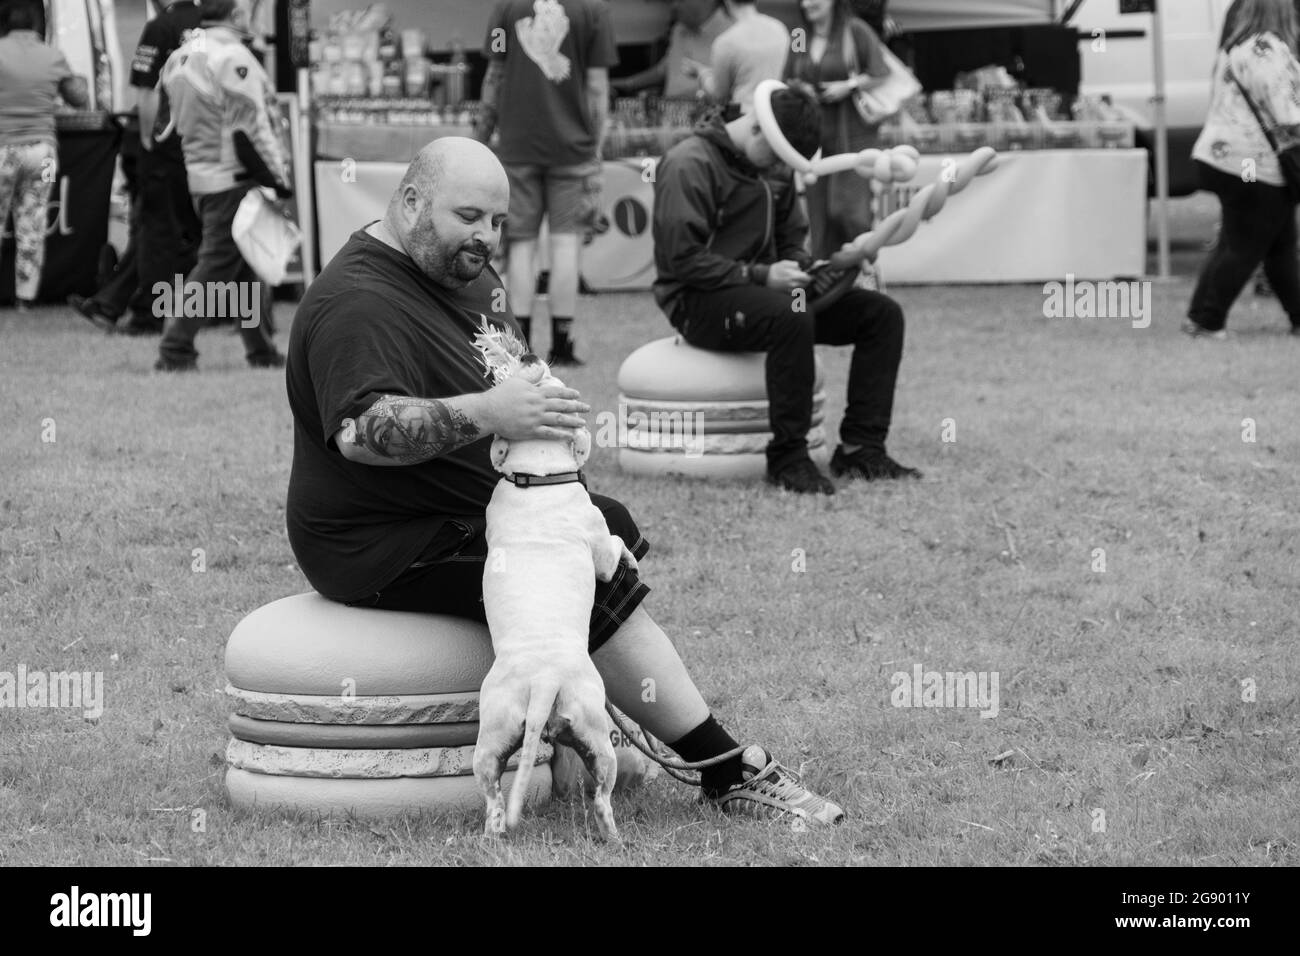 A man with a beard and a bald head, stroking his white dog whilst sitting on a circular decorative seat at a Food and Drink Festival, Harrogate, UK. Stock Photo